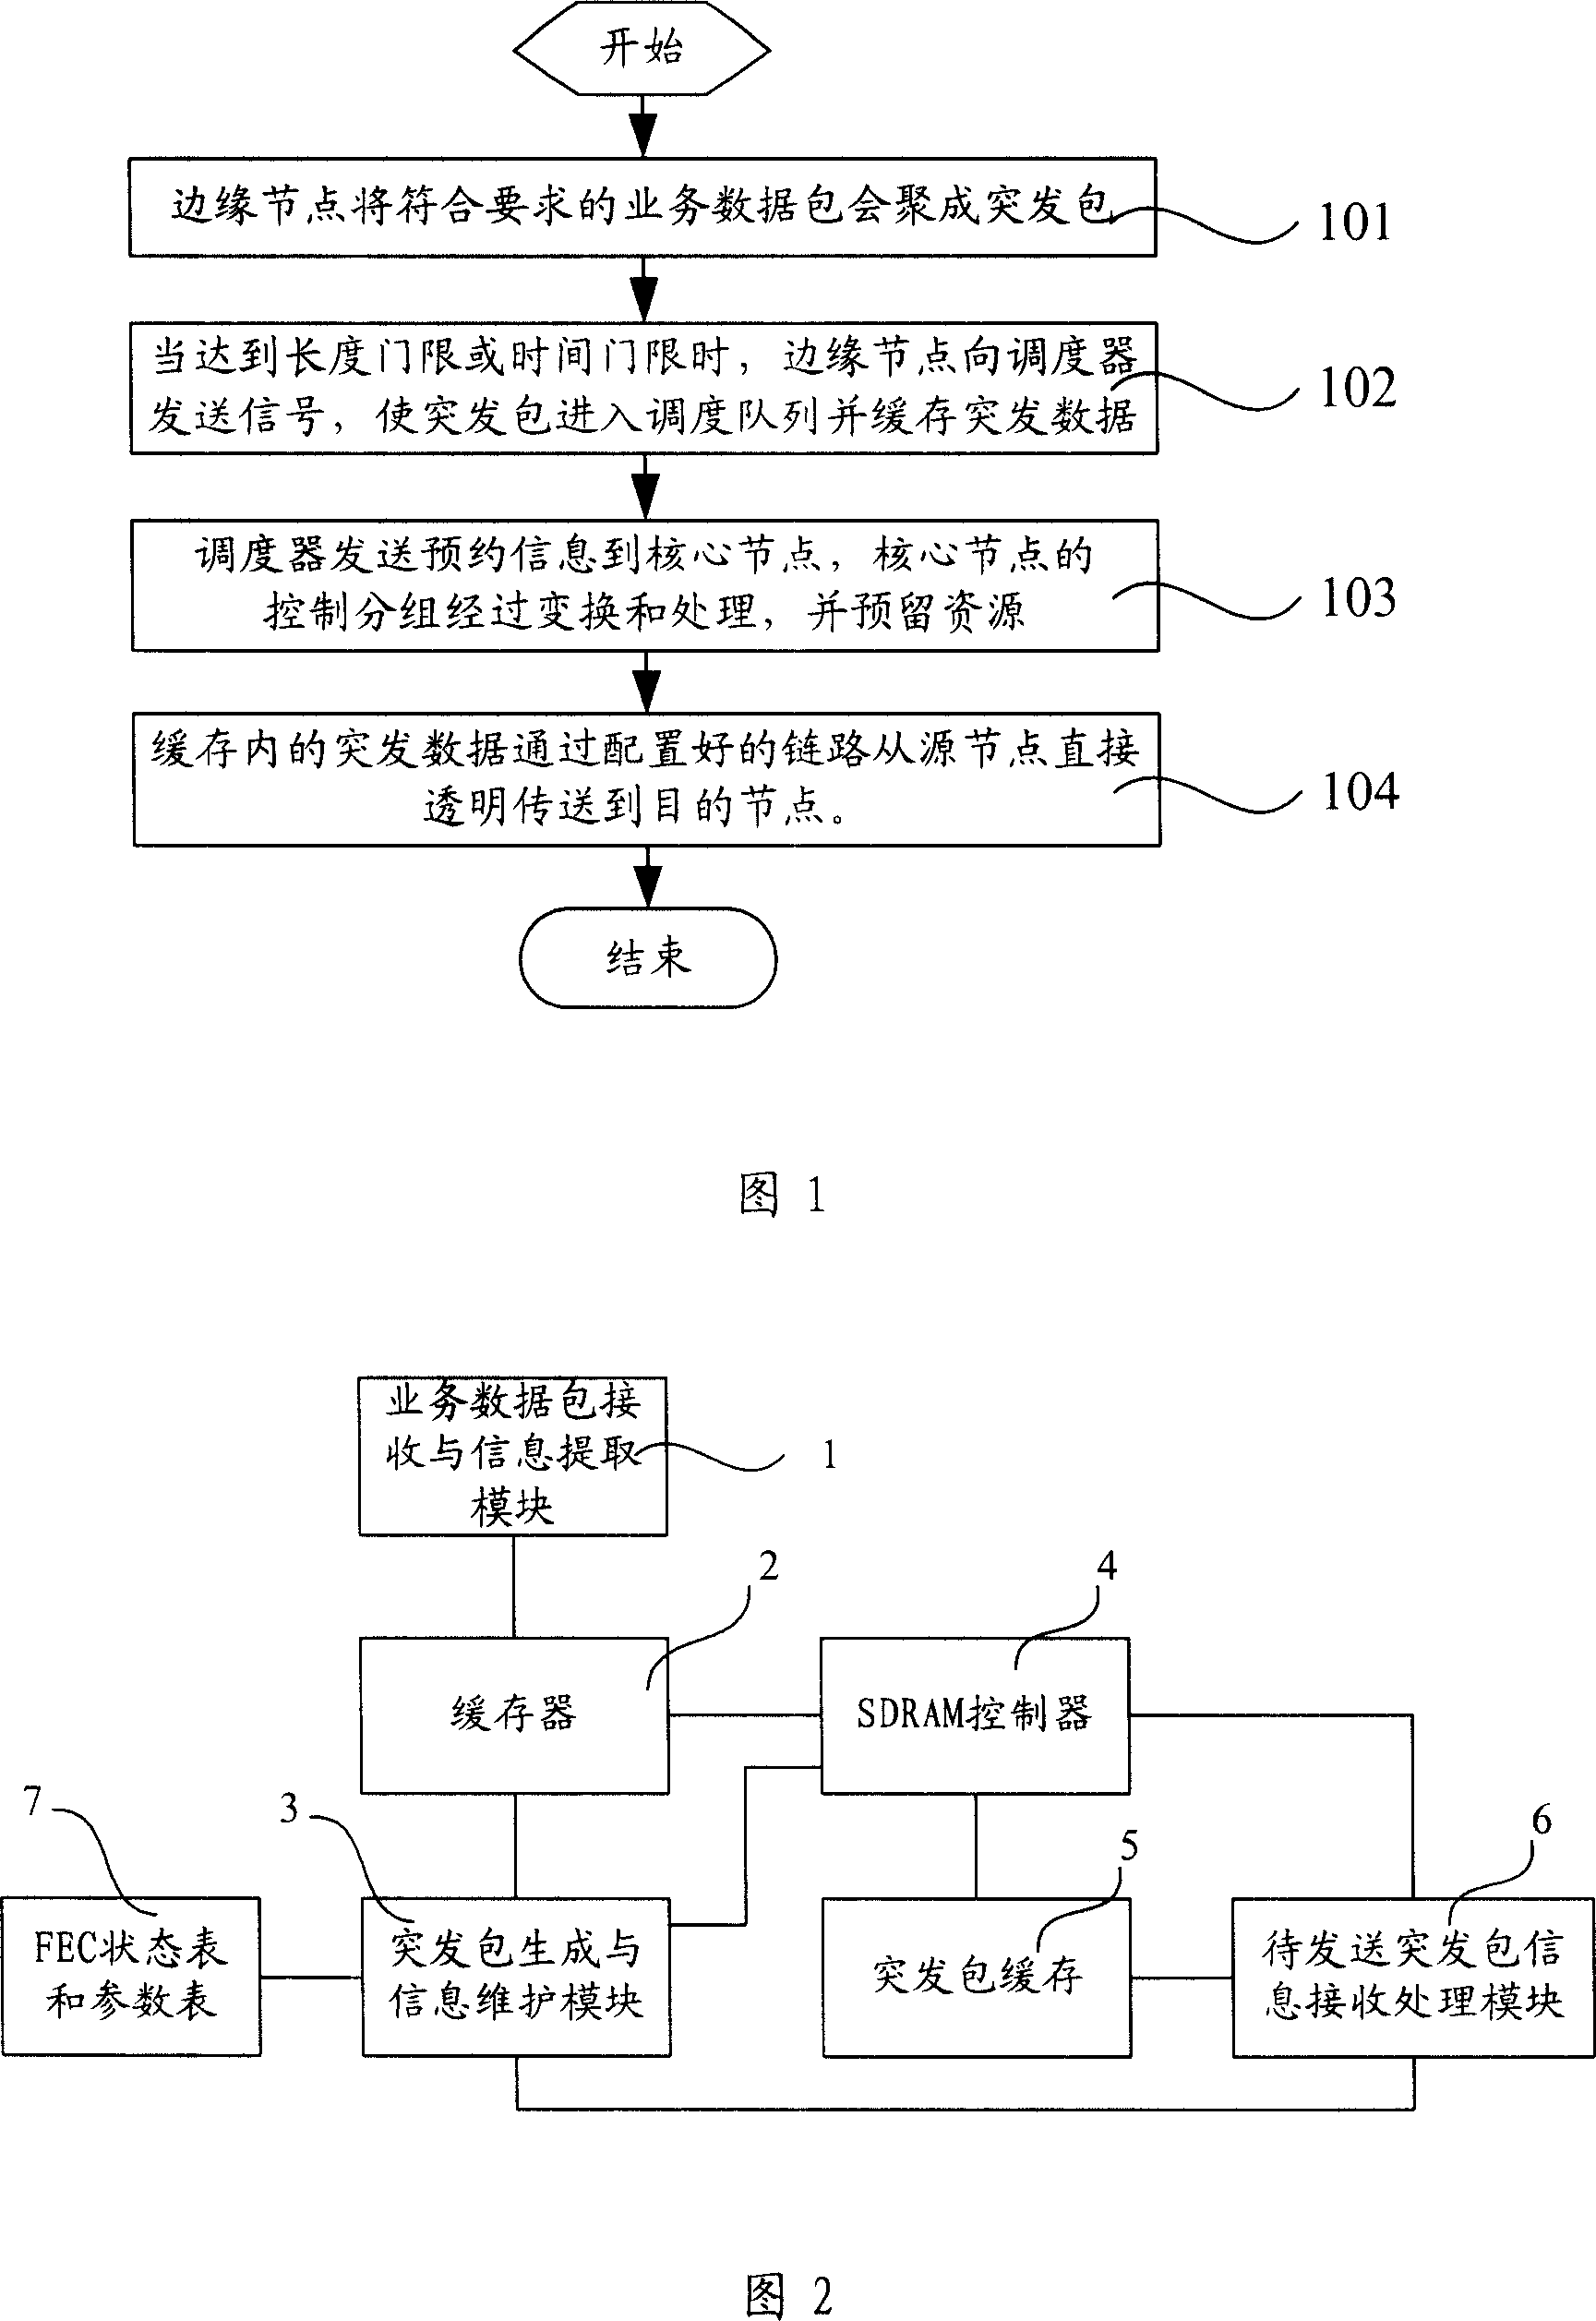 Optical burst switch network based burst packet dispatching system and method